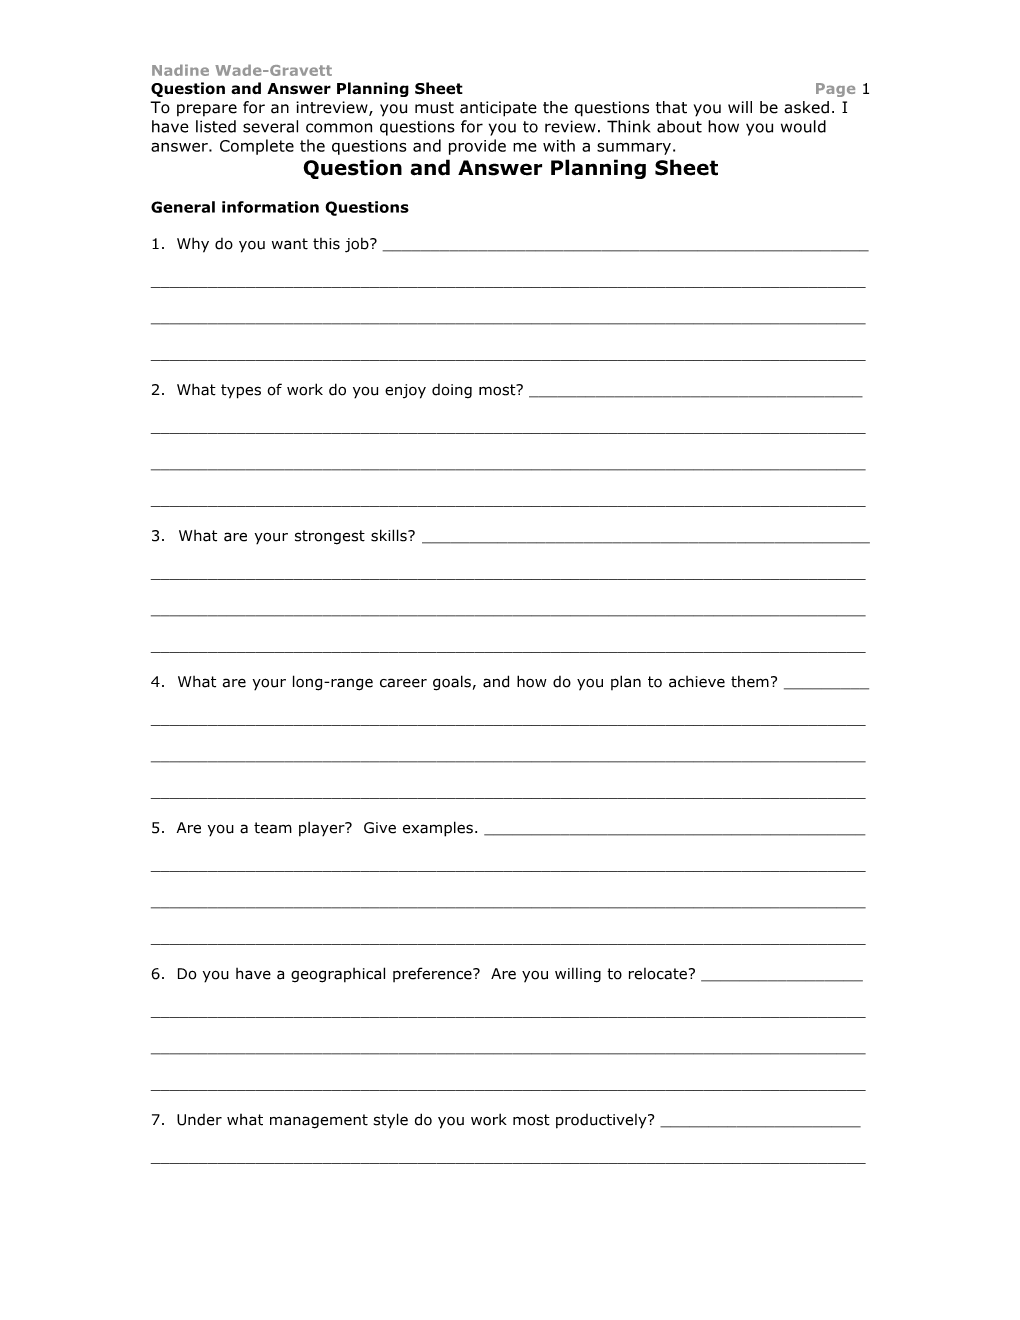 Question and Answer Planning Sheet